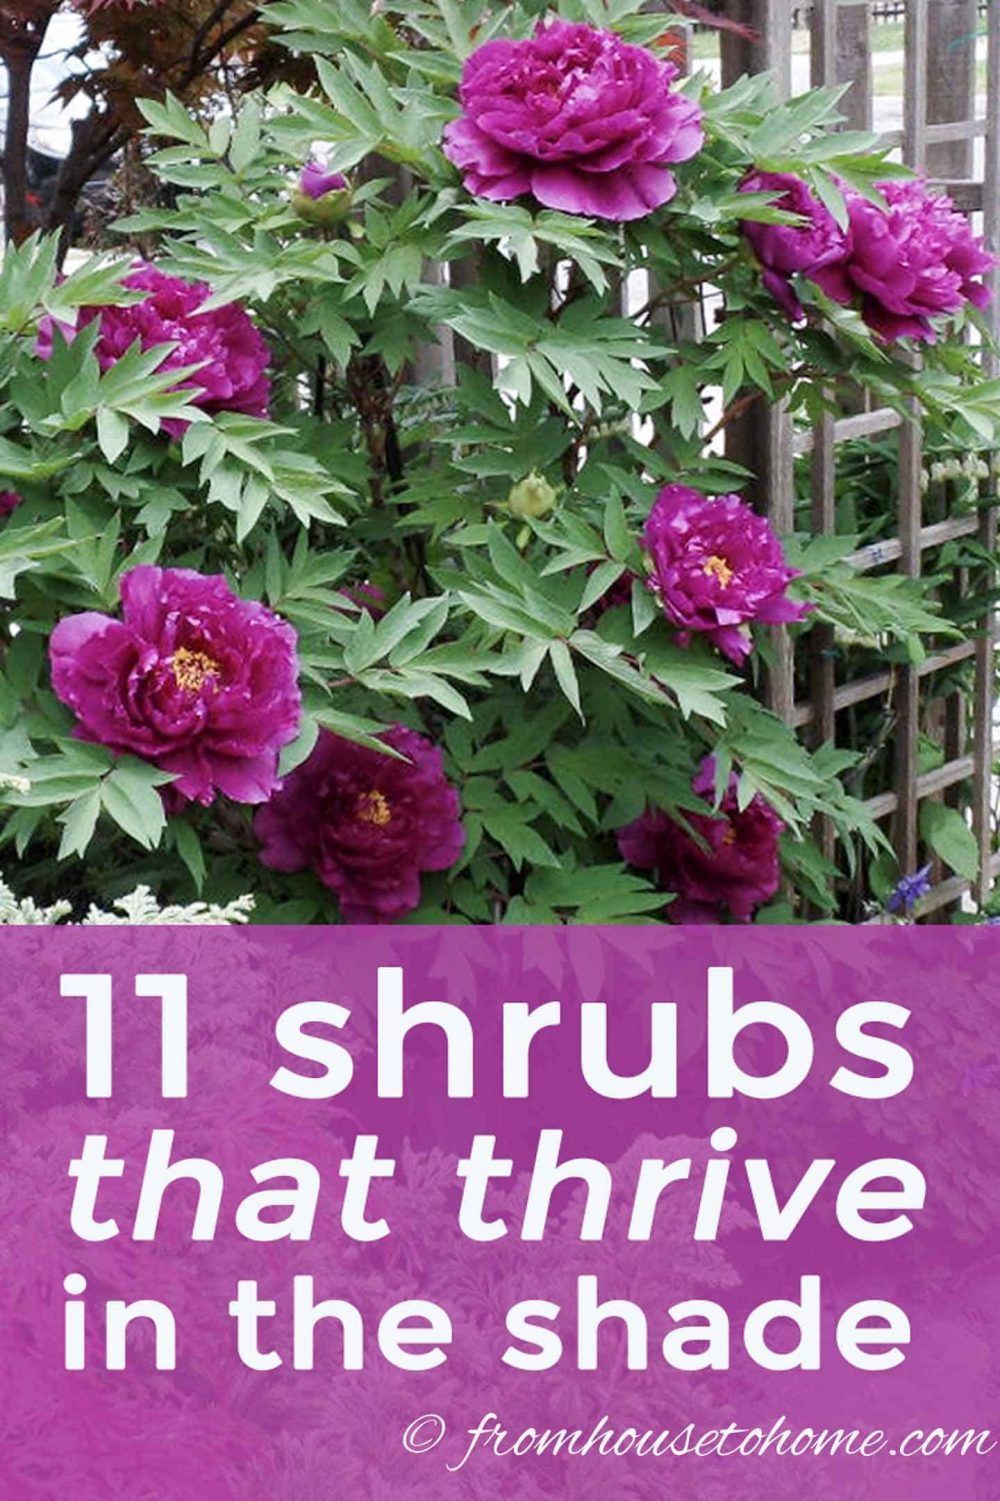 Shade Loving Shrubs: 15 Beautiful Bushes To Plant Under Trees - Gardening @ From House To Home -   17 plants Flowers design ideas